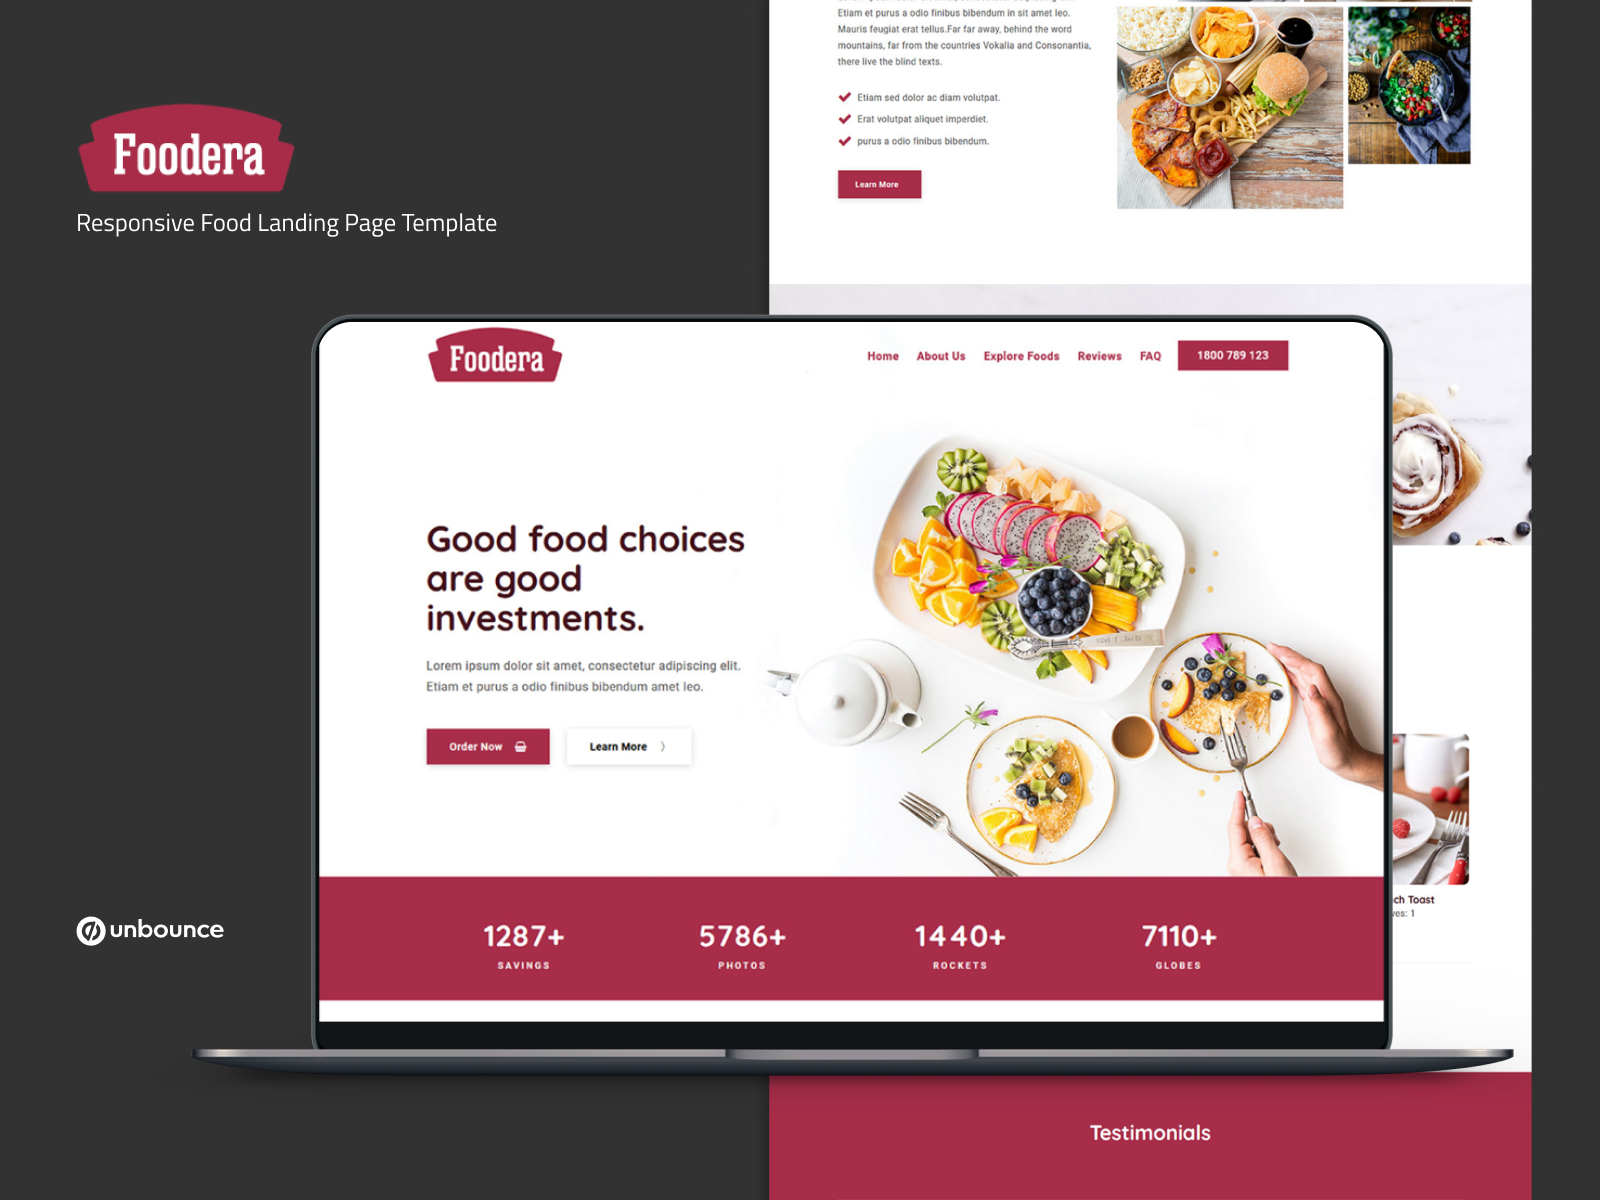 foodera-unbounce-food-landing-page-template-2141